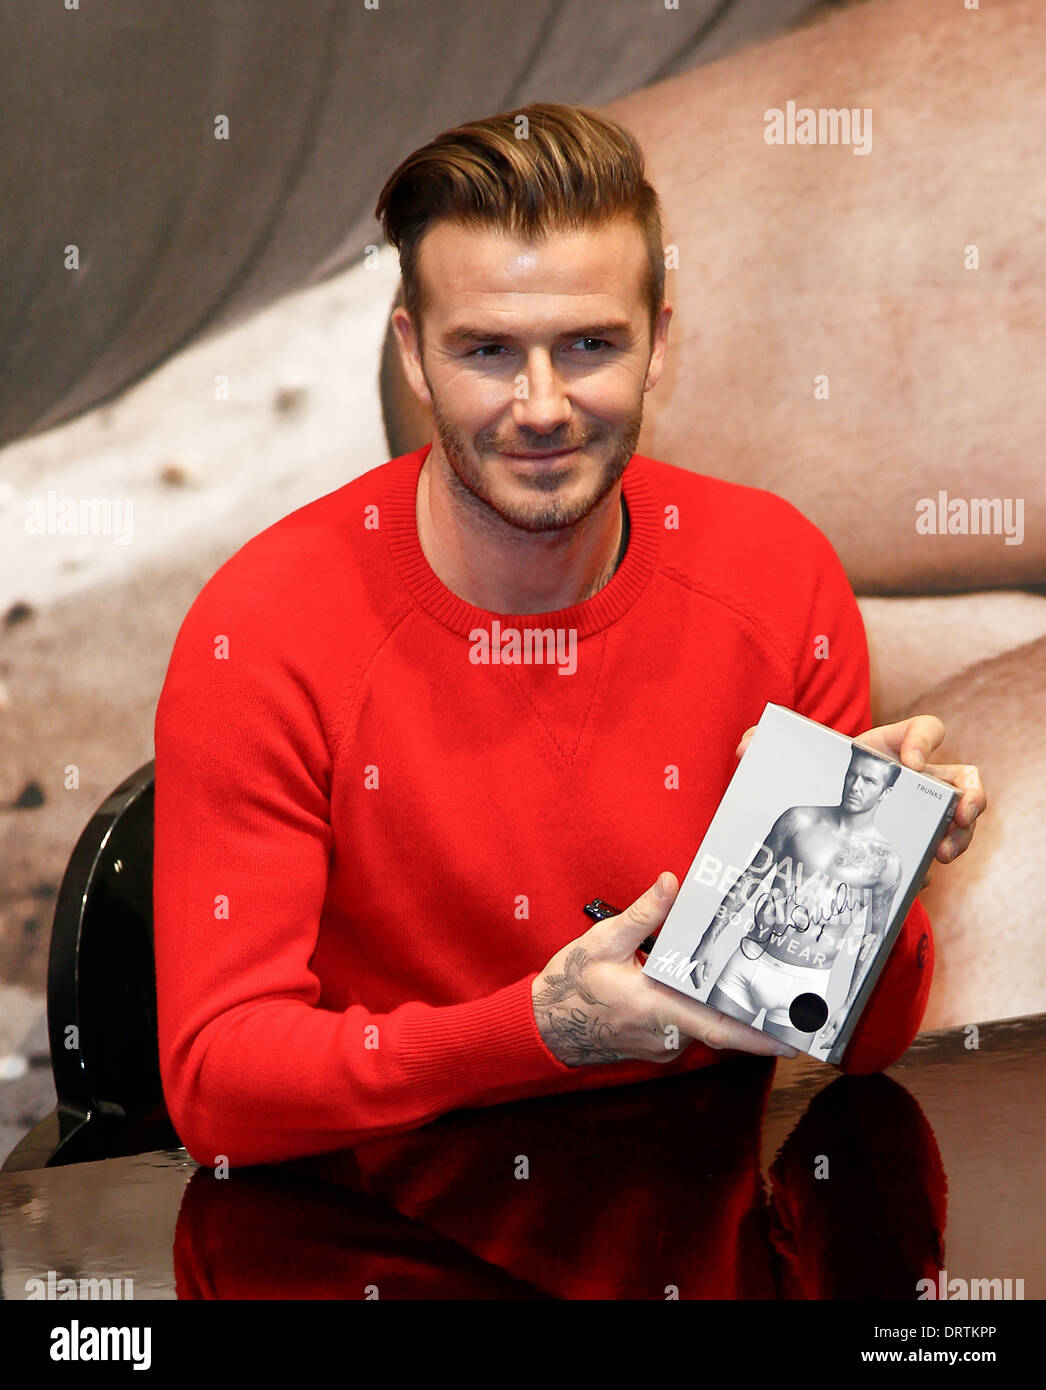 David Beckham attends the launch of his new Bodywear range at the H&M Super Bowl Event at H&M Times Square. Stock Photo